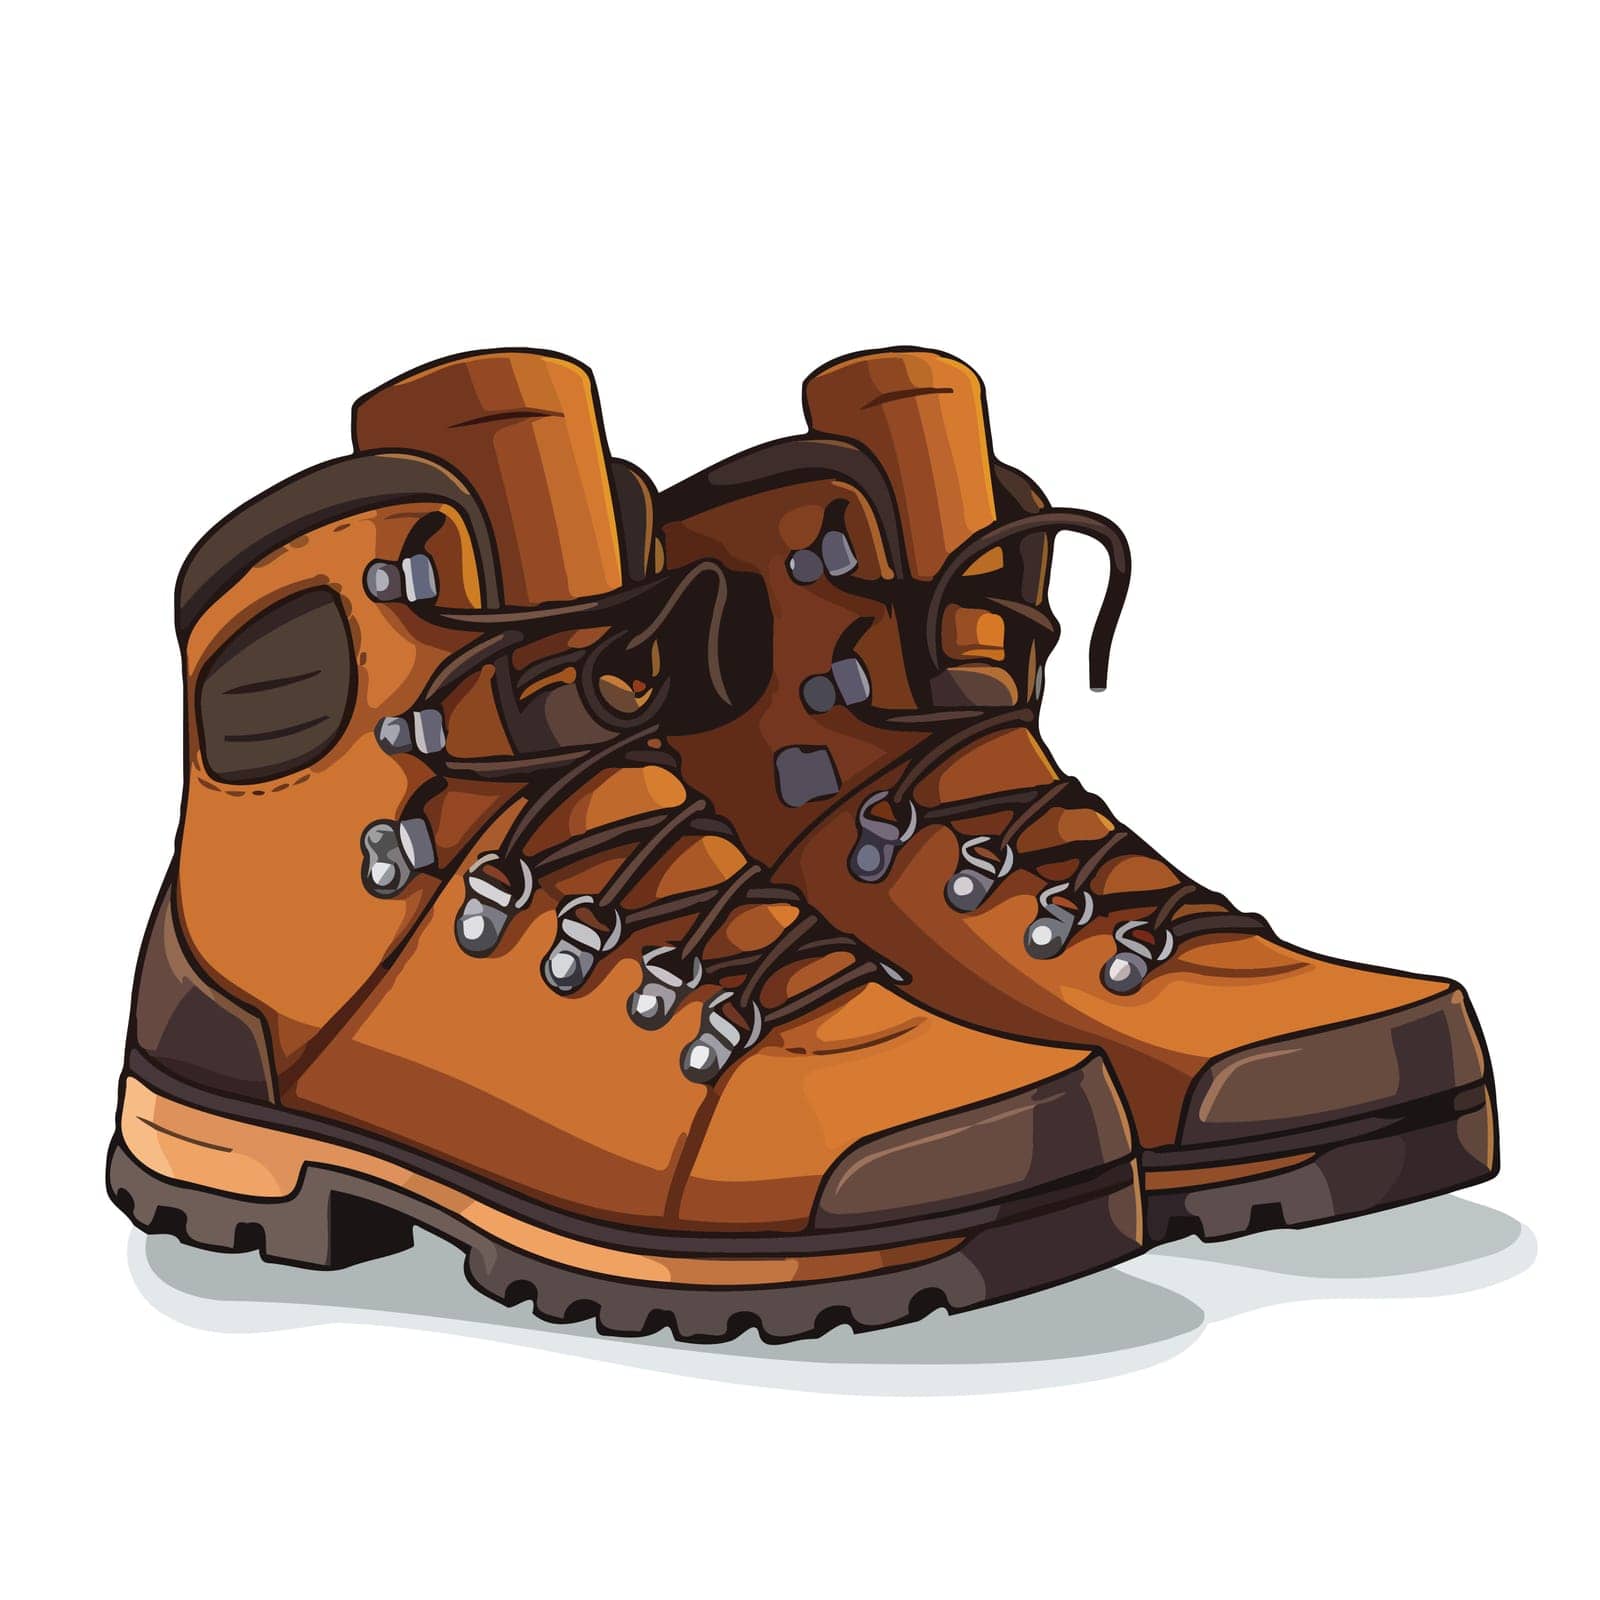 Boots image. Hiking boots image isolated. Vector illustration by Chekman